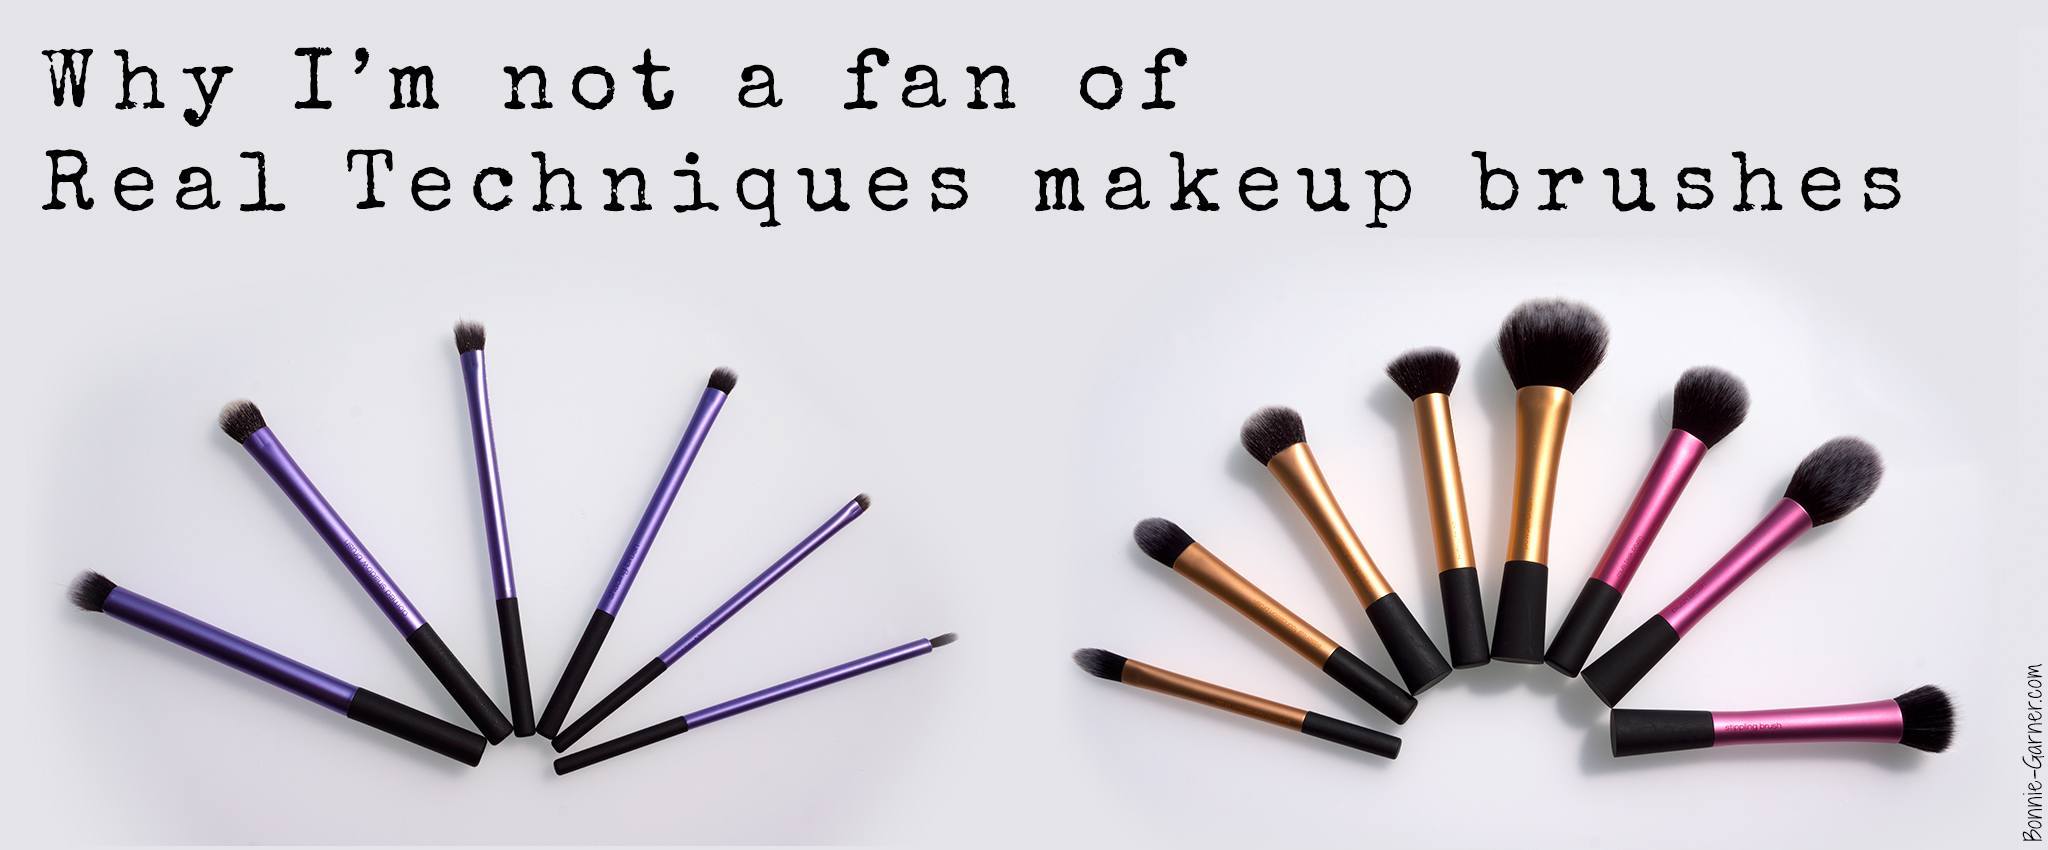 Why I'm not a fan of Real Techniques makeup brushes